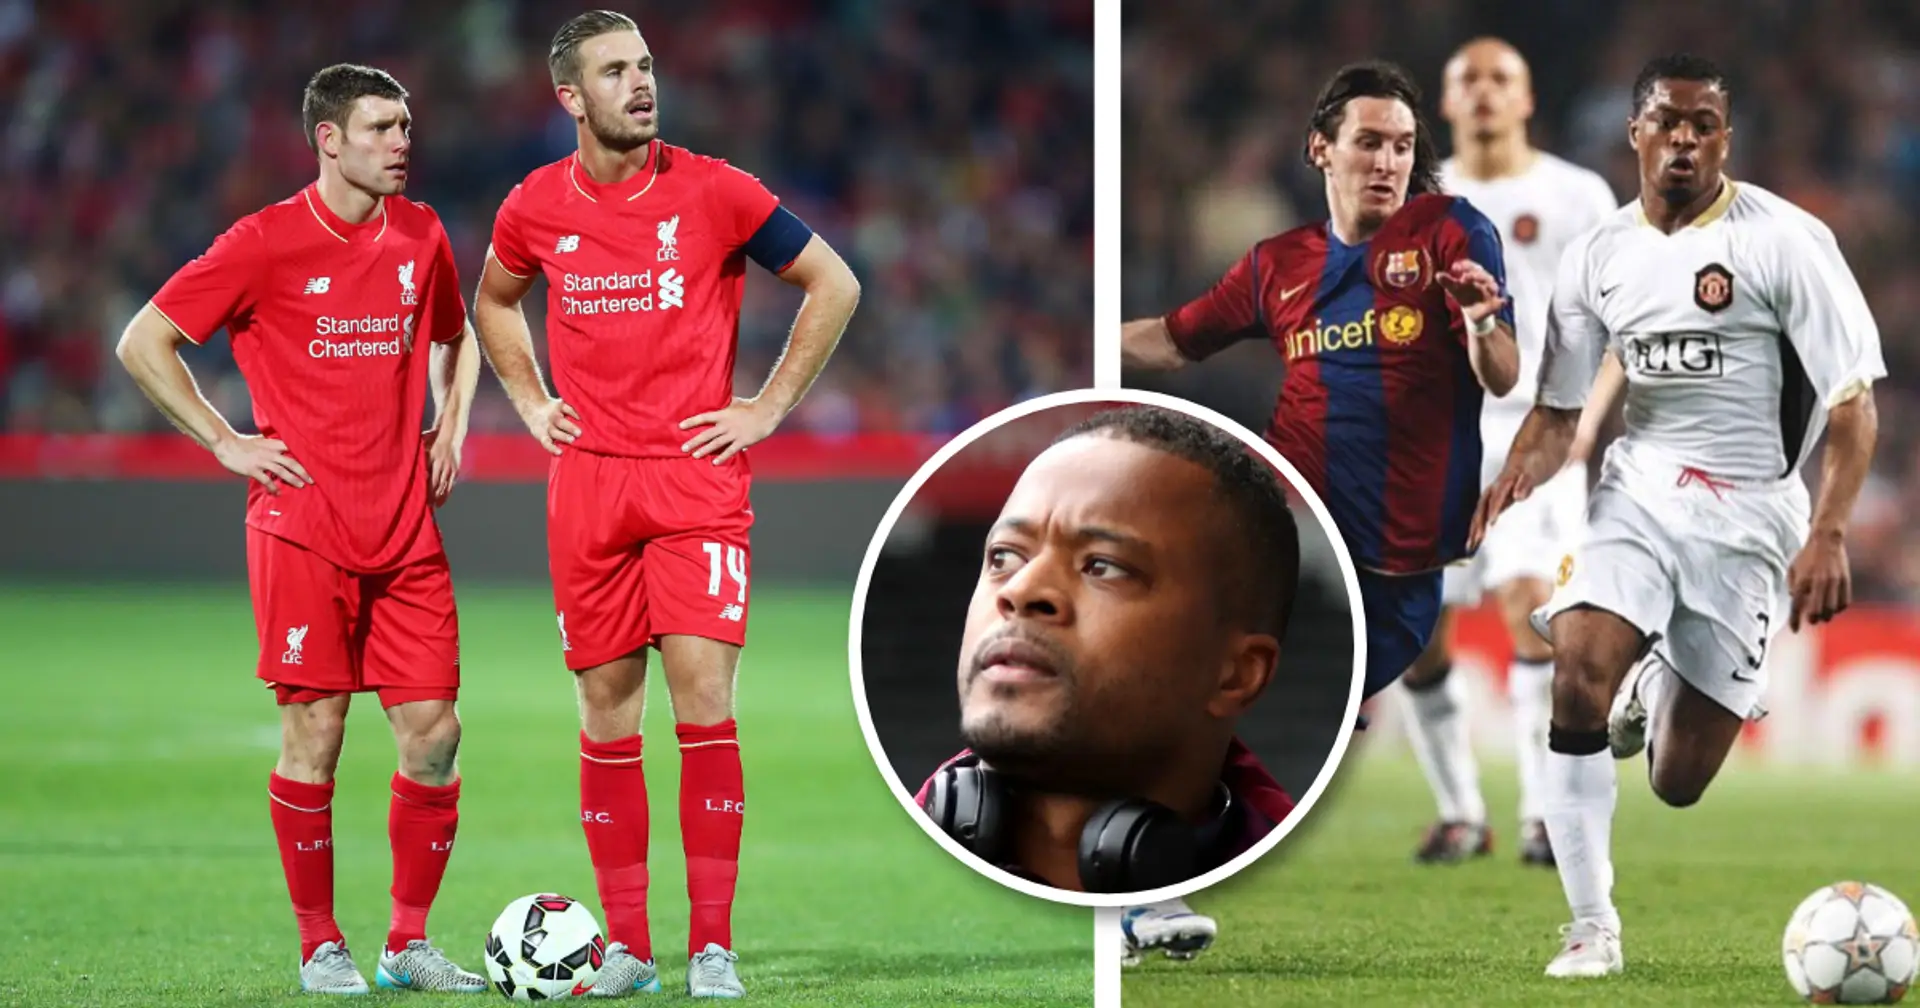 'I could deal with Messi': Evra names Liverpool player as his toughest opponent